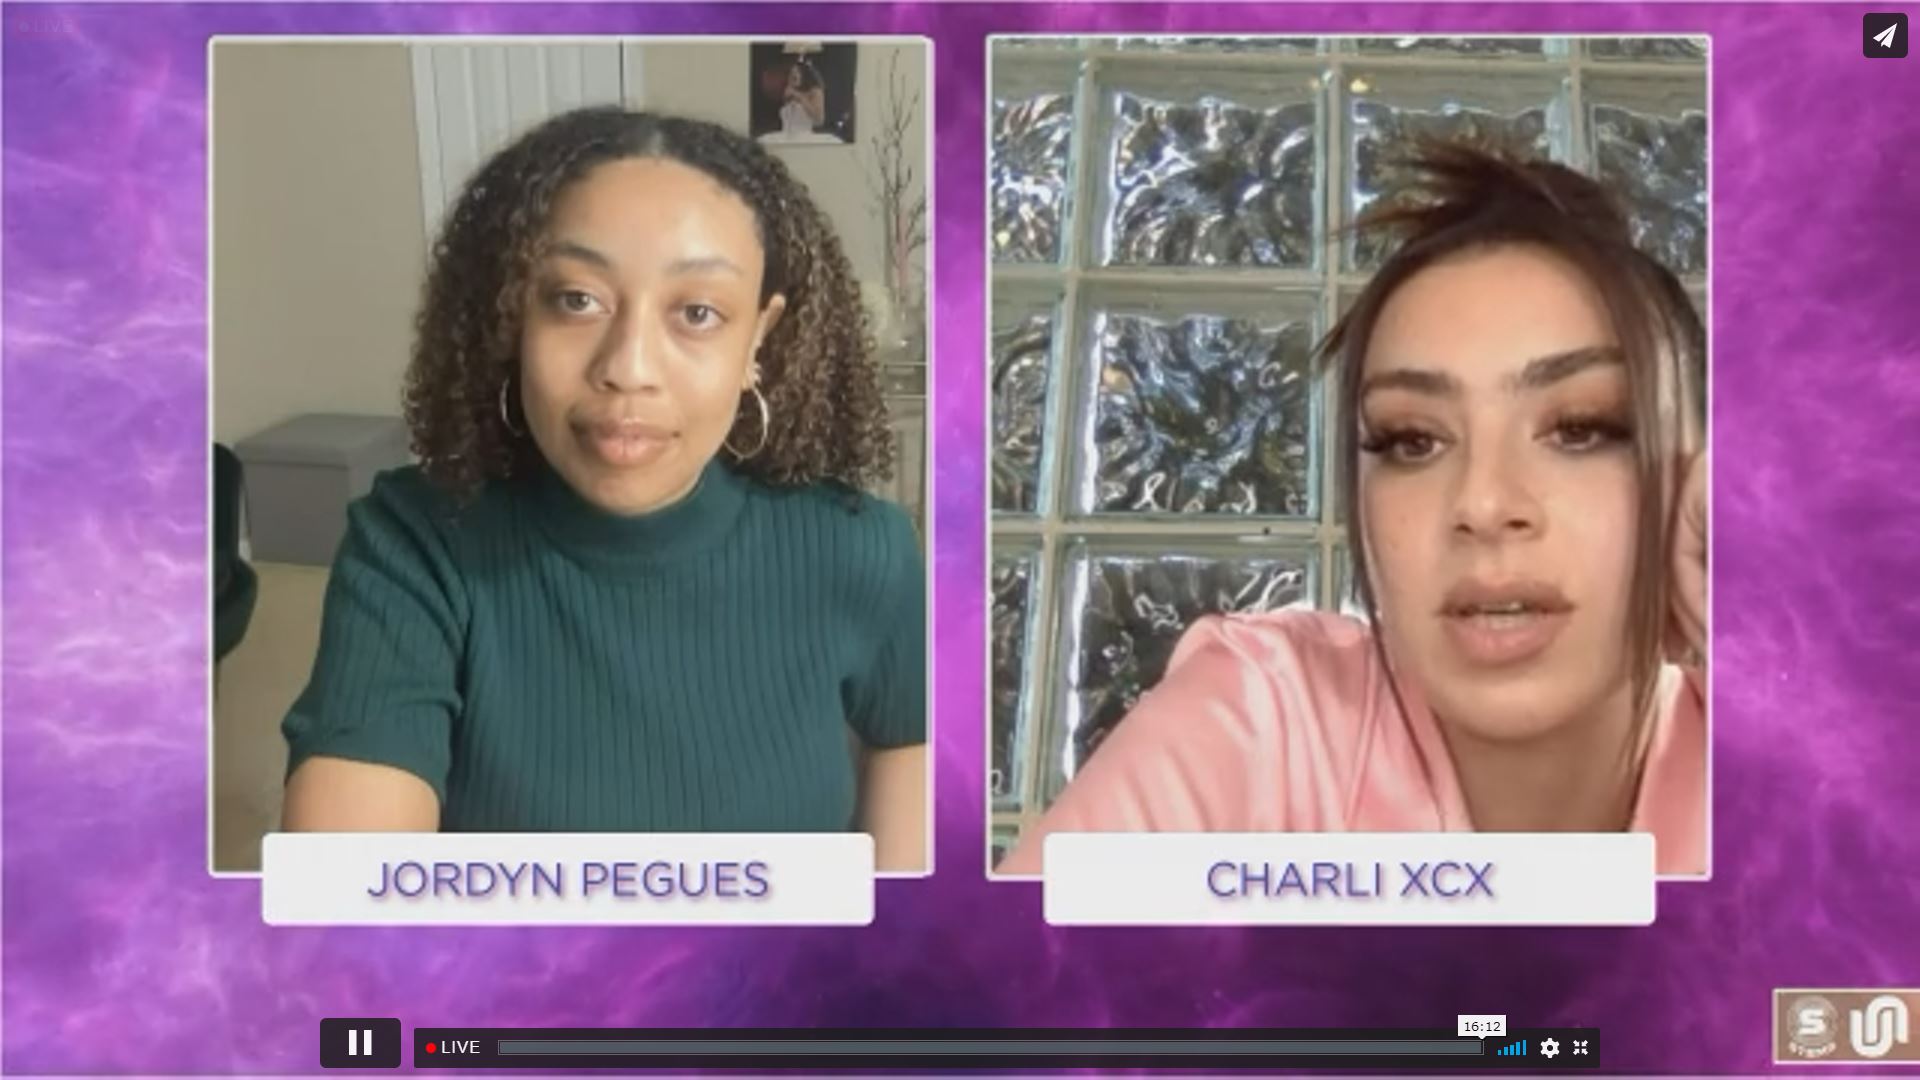 Charli XCX in her interview